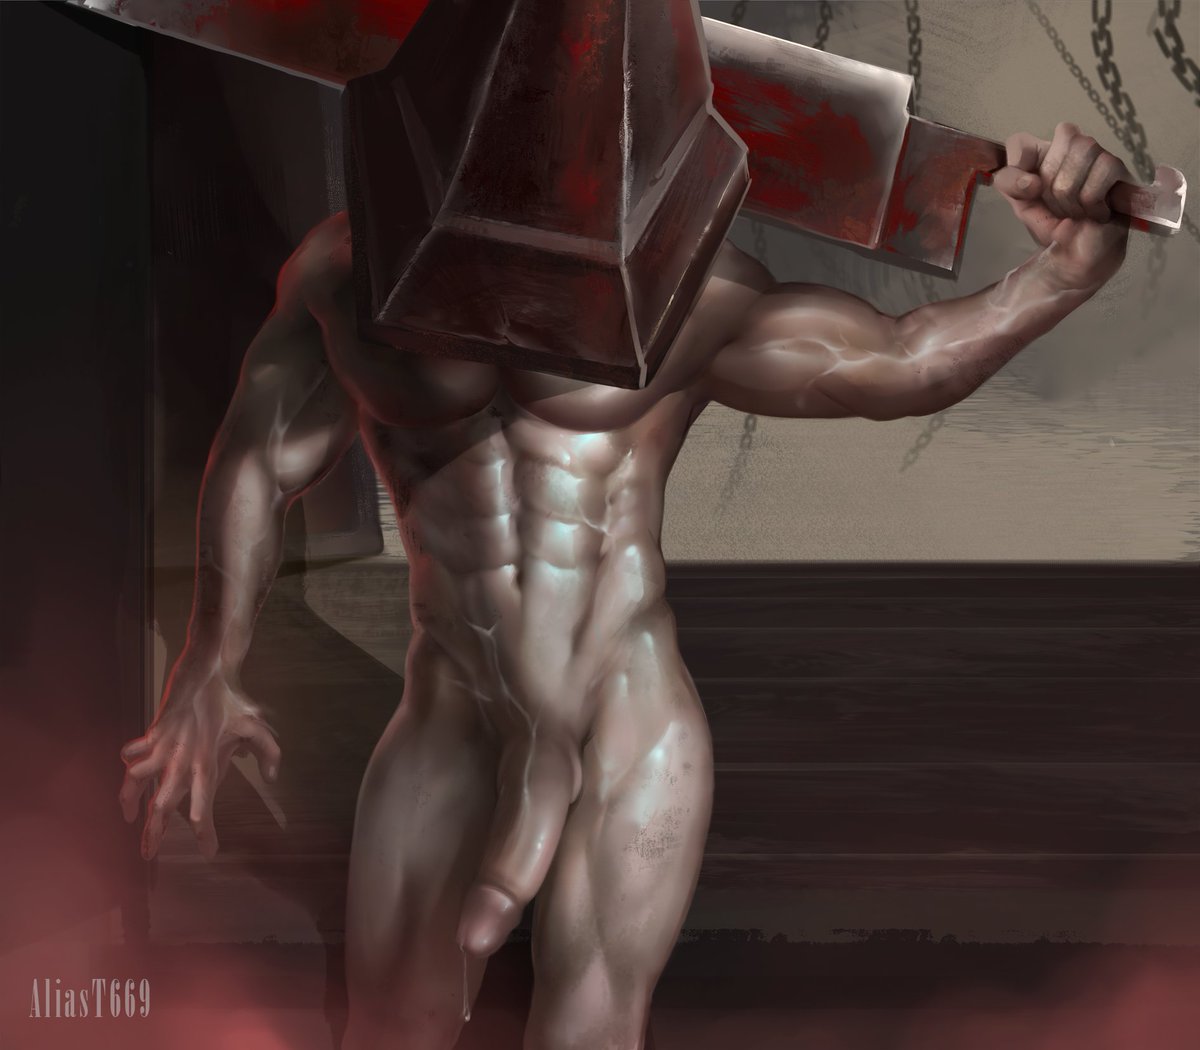 So I finished the Pyramid Head nsfw version. 